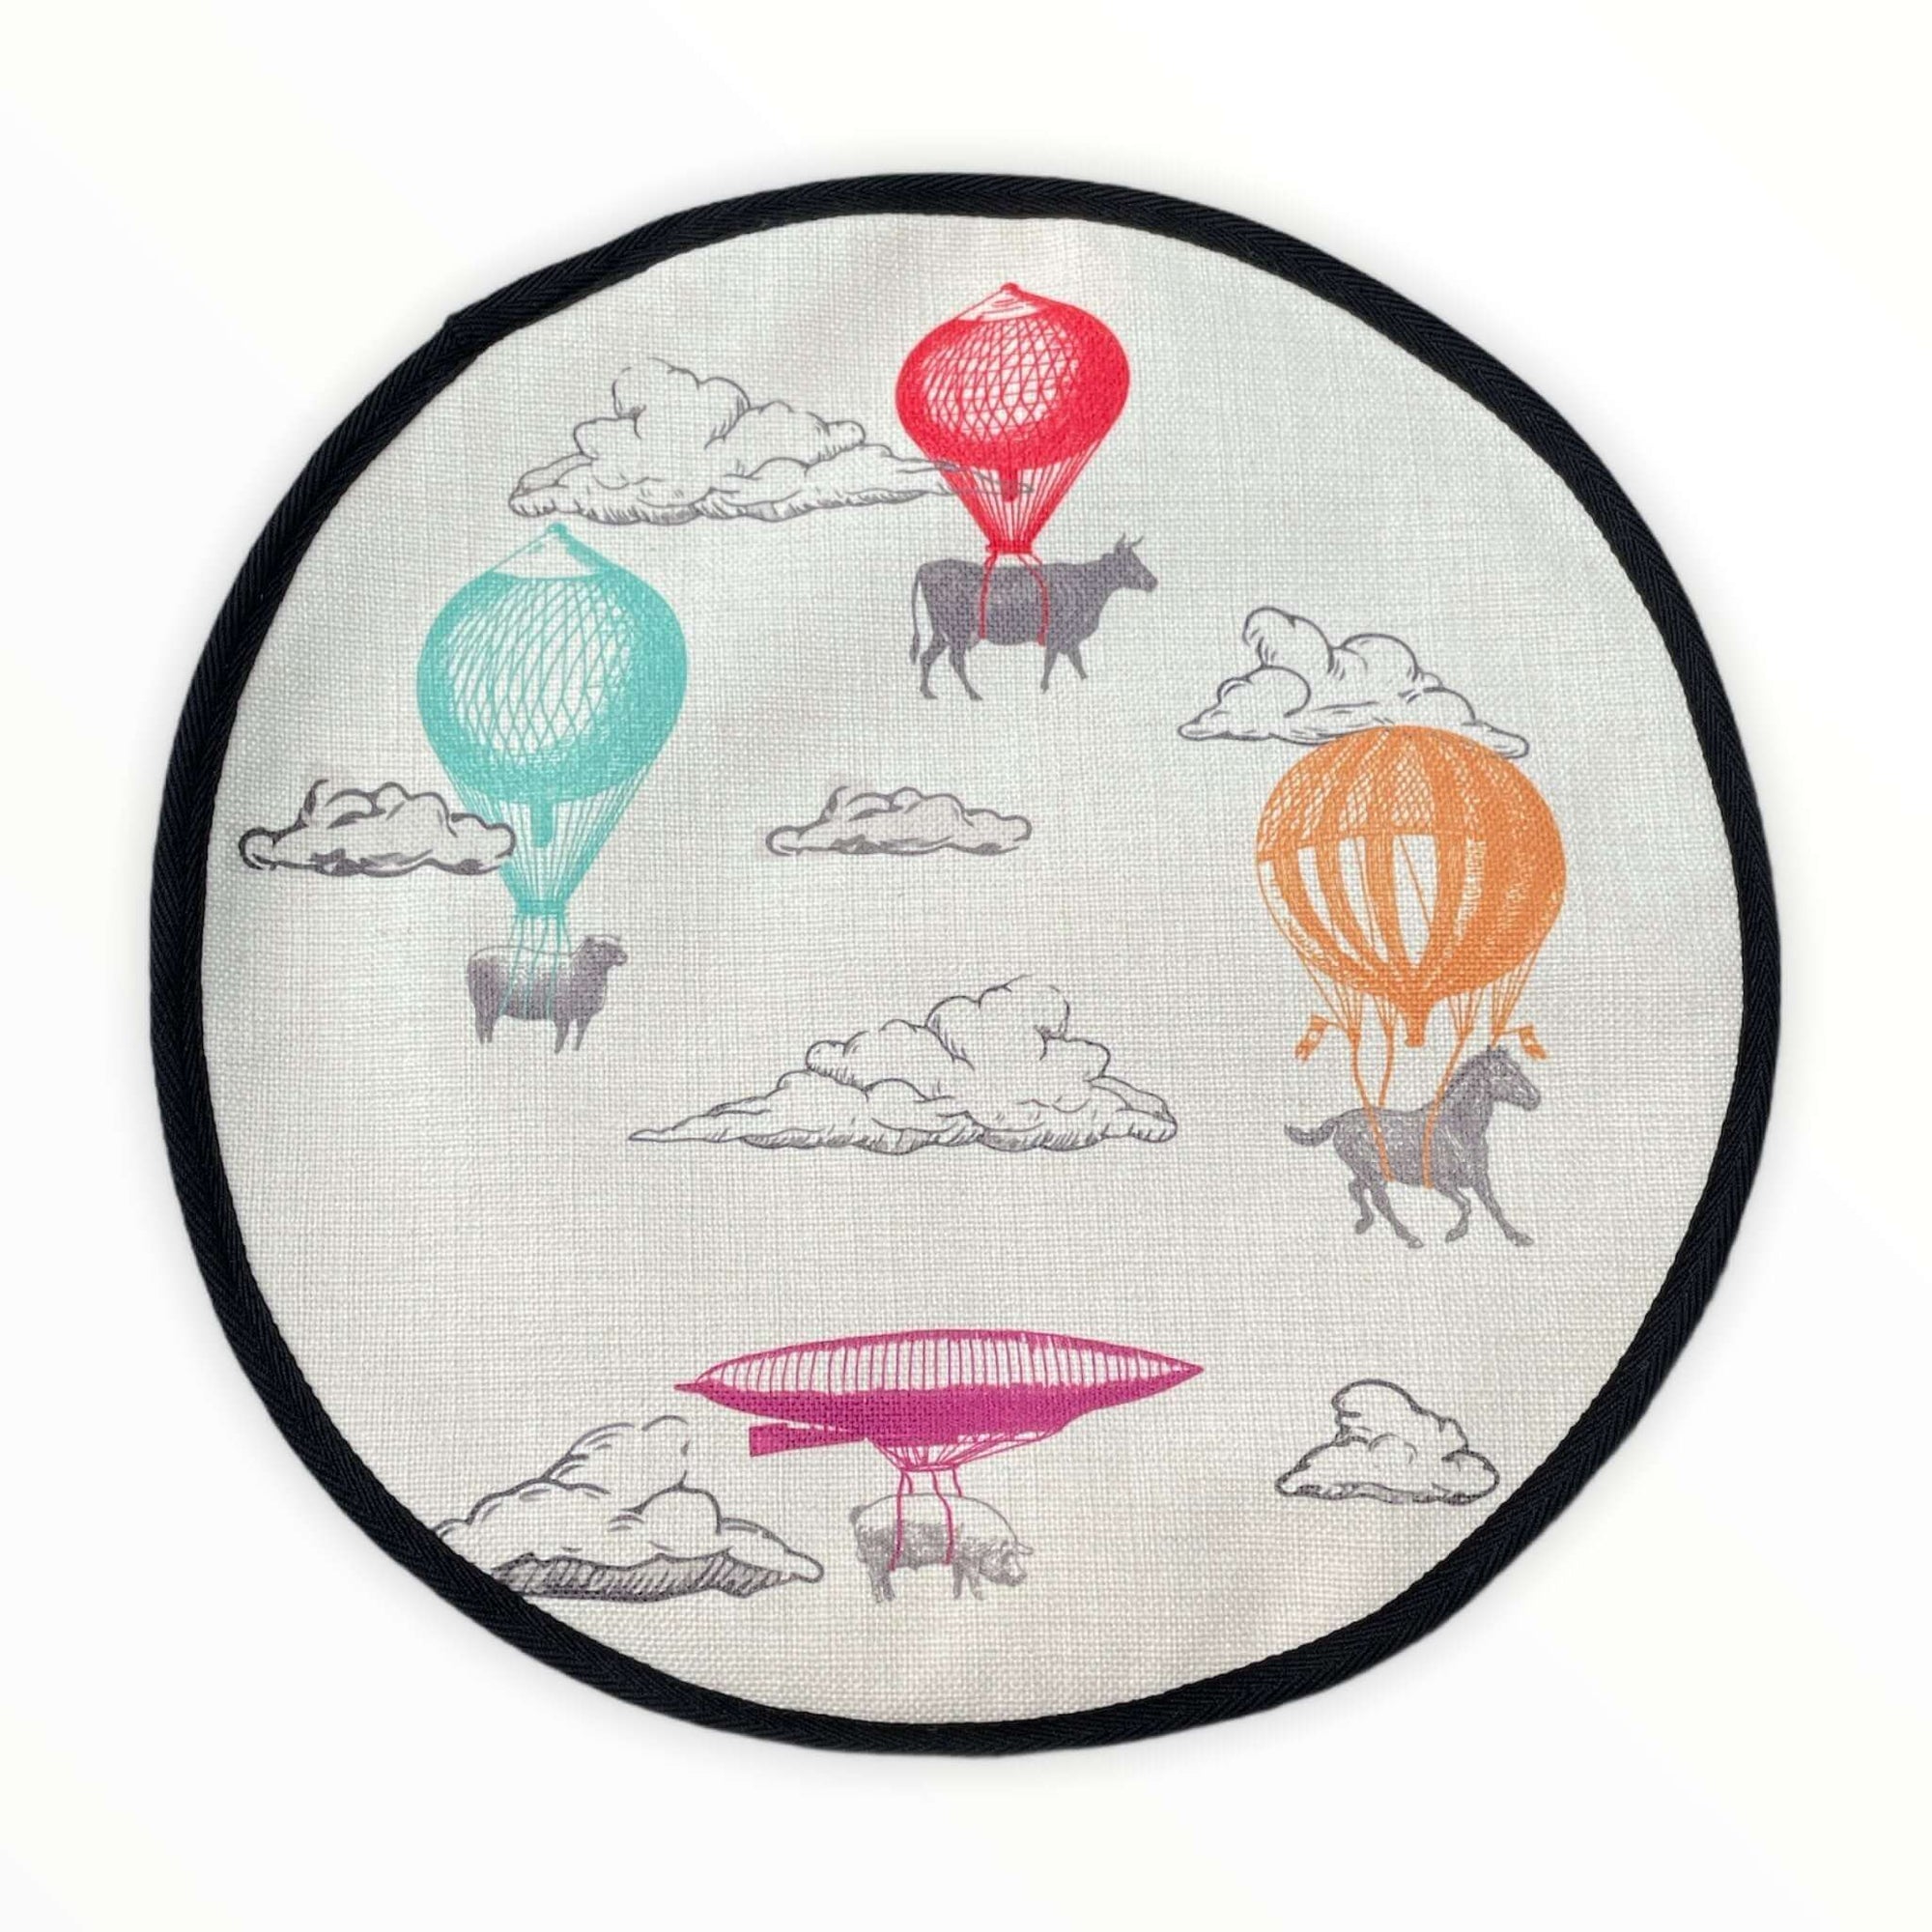 Farm High Life cow, sheep, horse and pig sketch drawings with colourful hot air balloons print on a beige linen circular aga cover with black hemming. Mustard and Gray